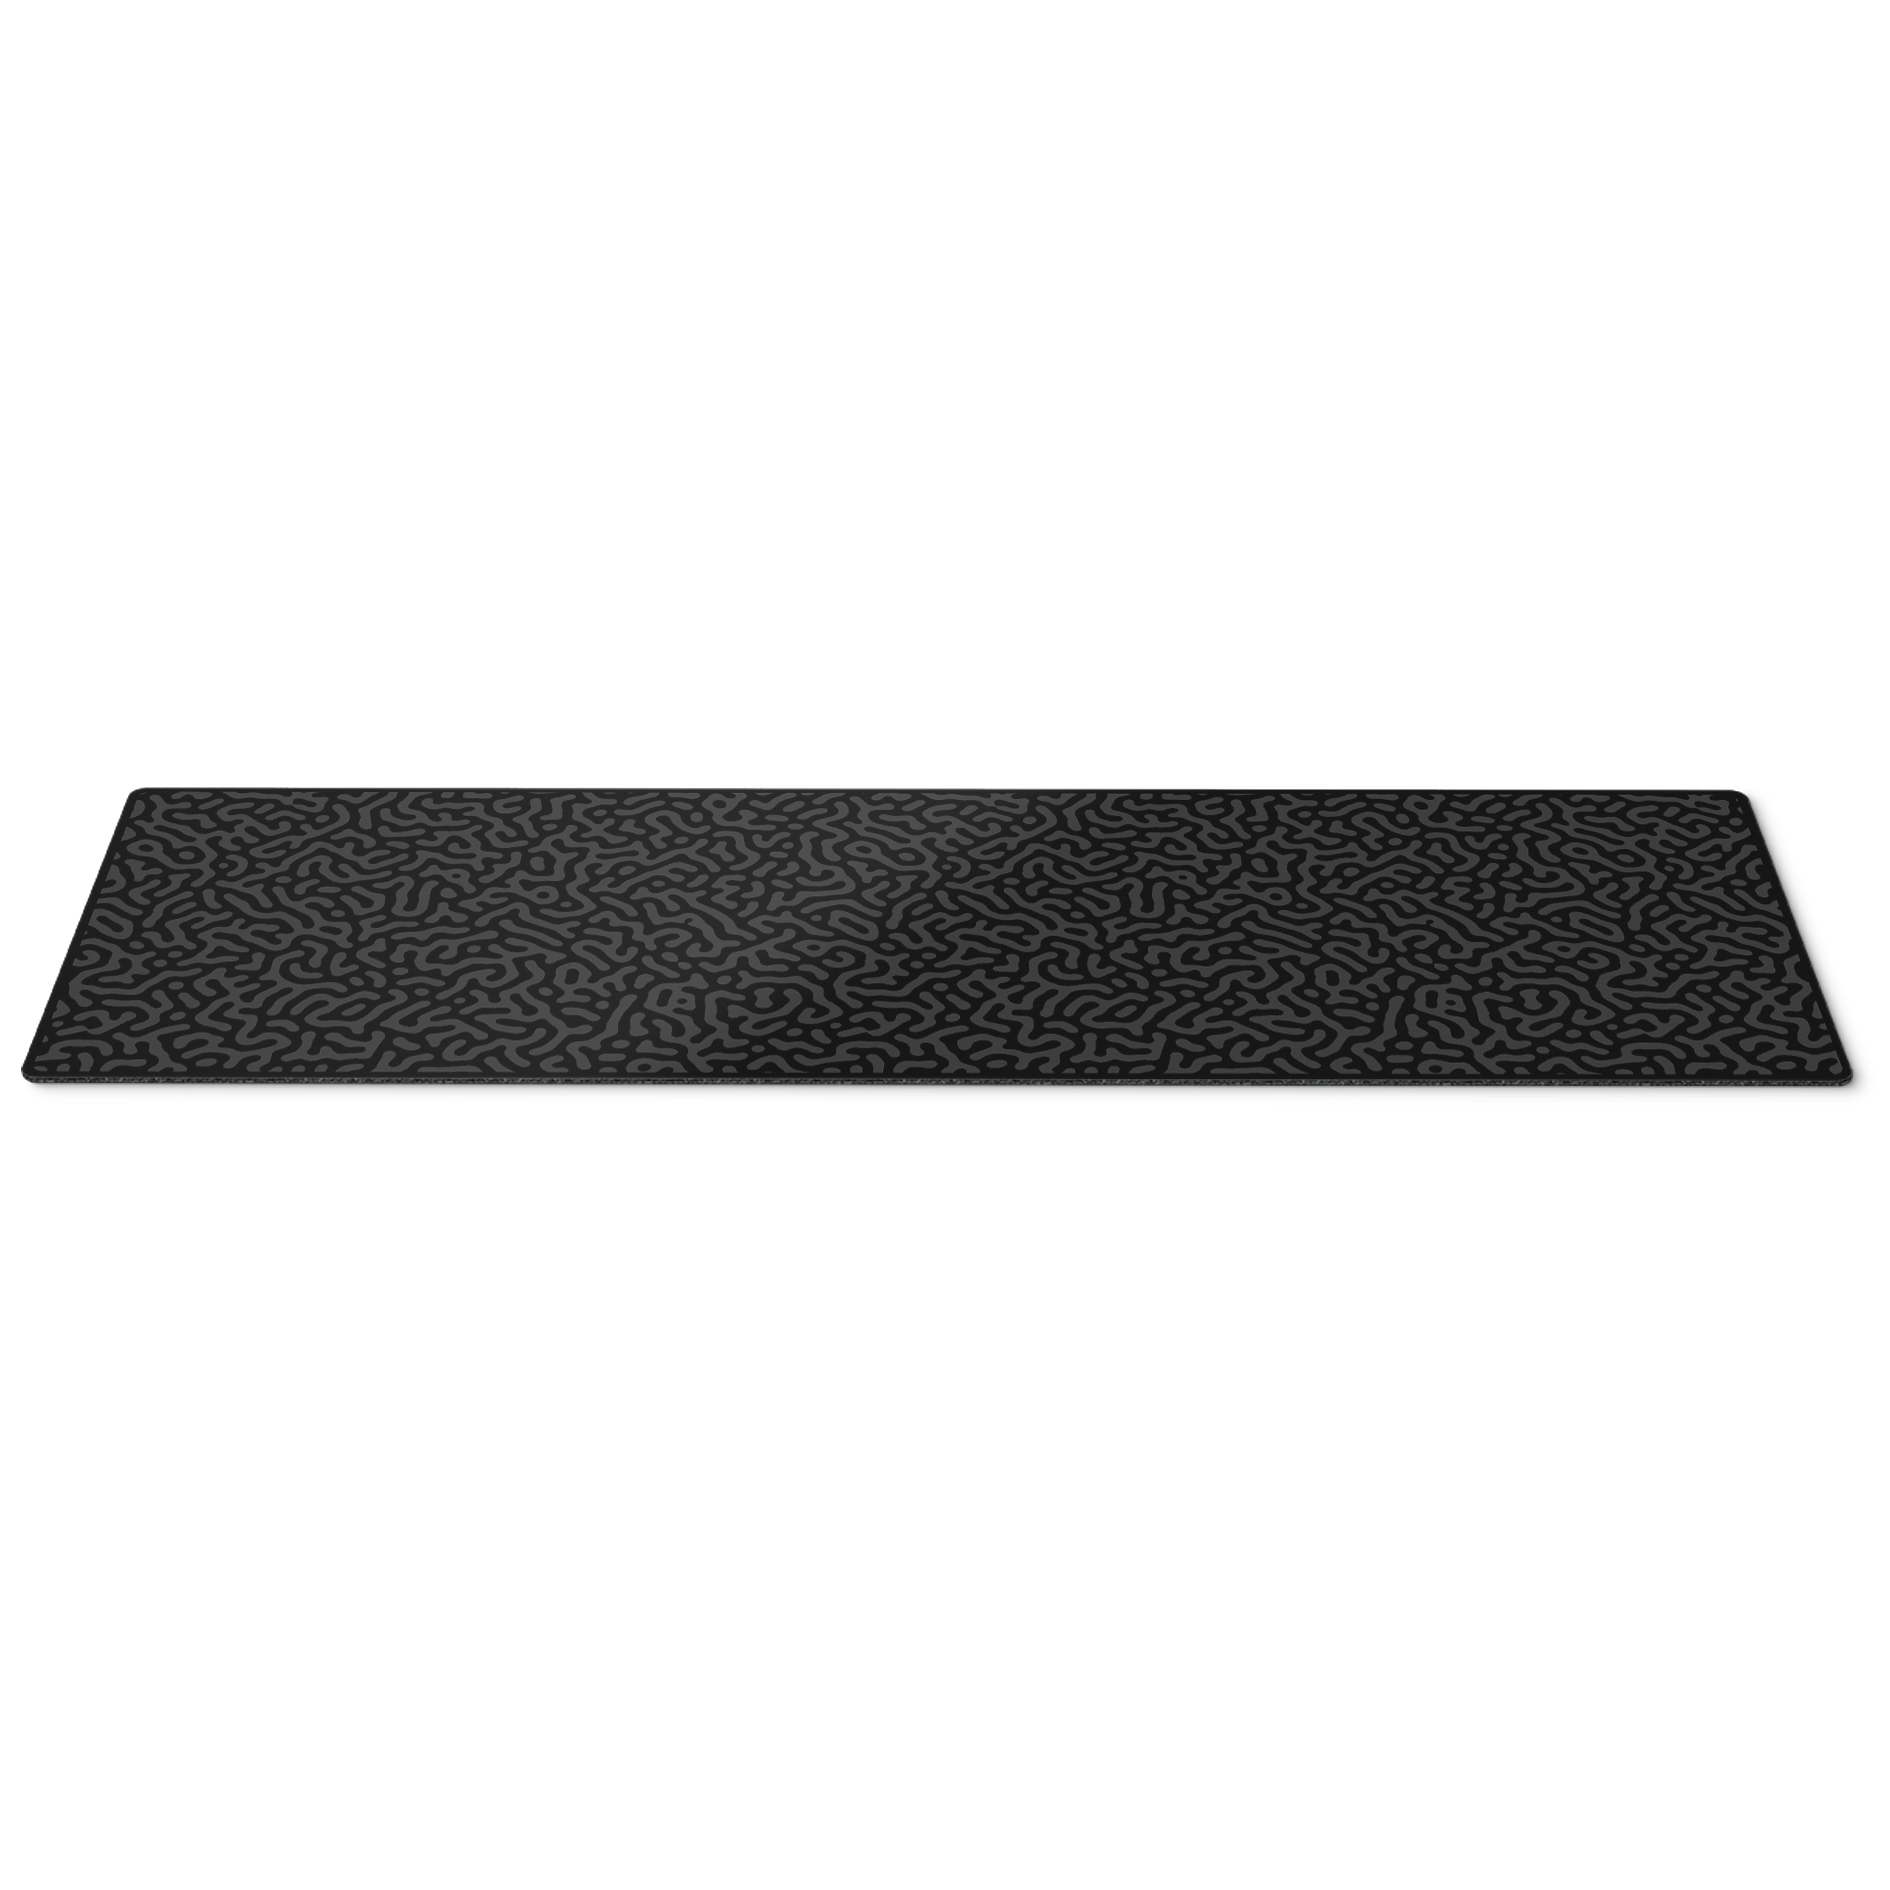 CM Stealth Edition XL Gaming Mouse Mat